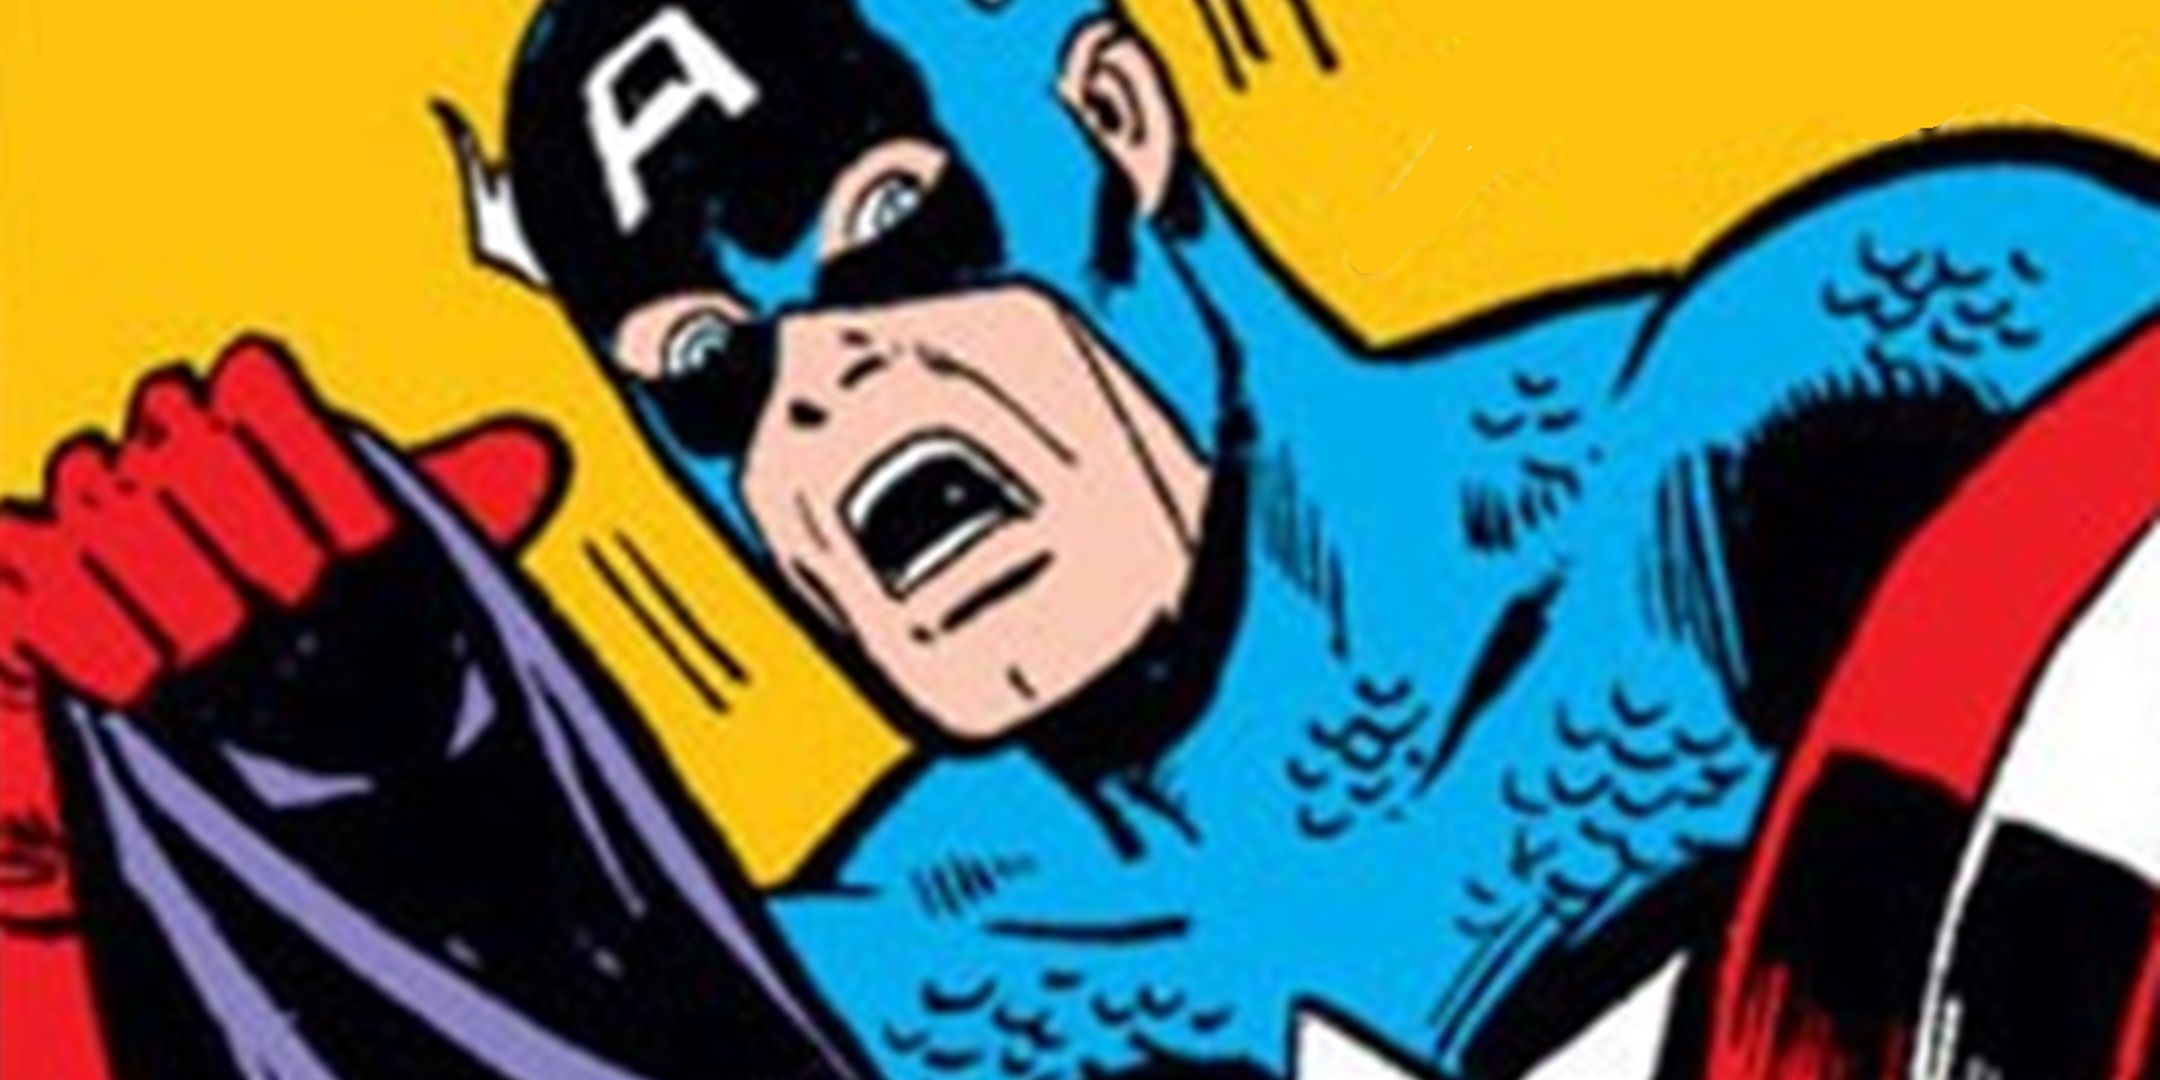 Captain America is shcoked by a discovery